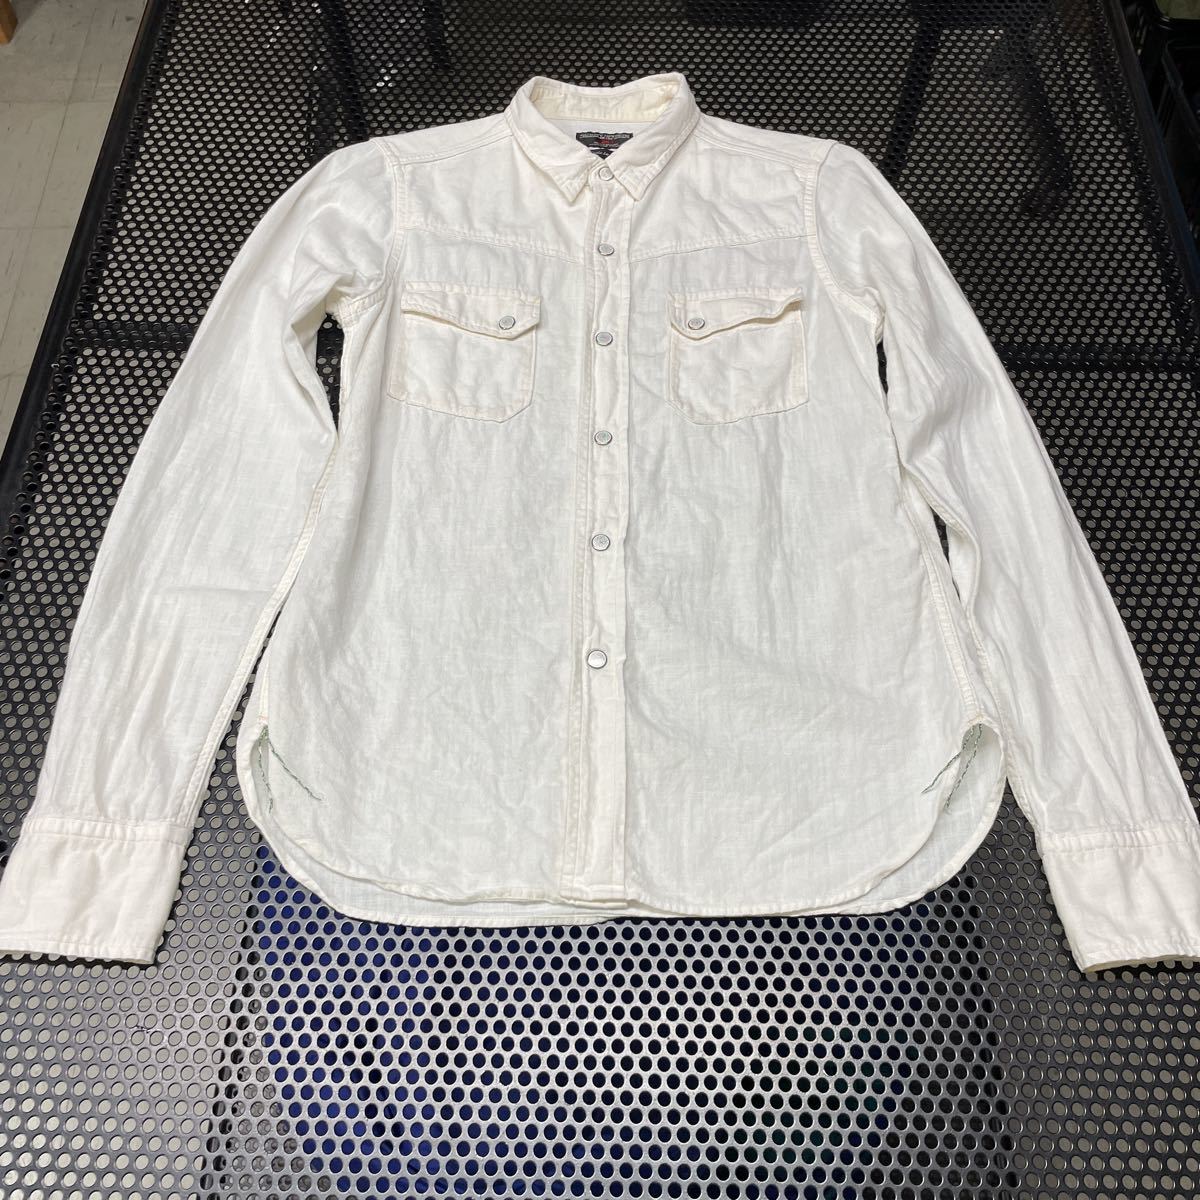 SUNNYSPORTS× United Arrows long sleeve western shirt white white size unknown XS size about collar inside side dirt equipped ( laundry ending 